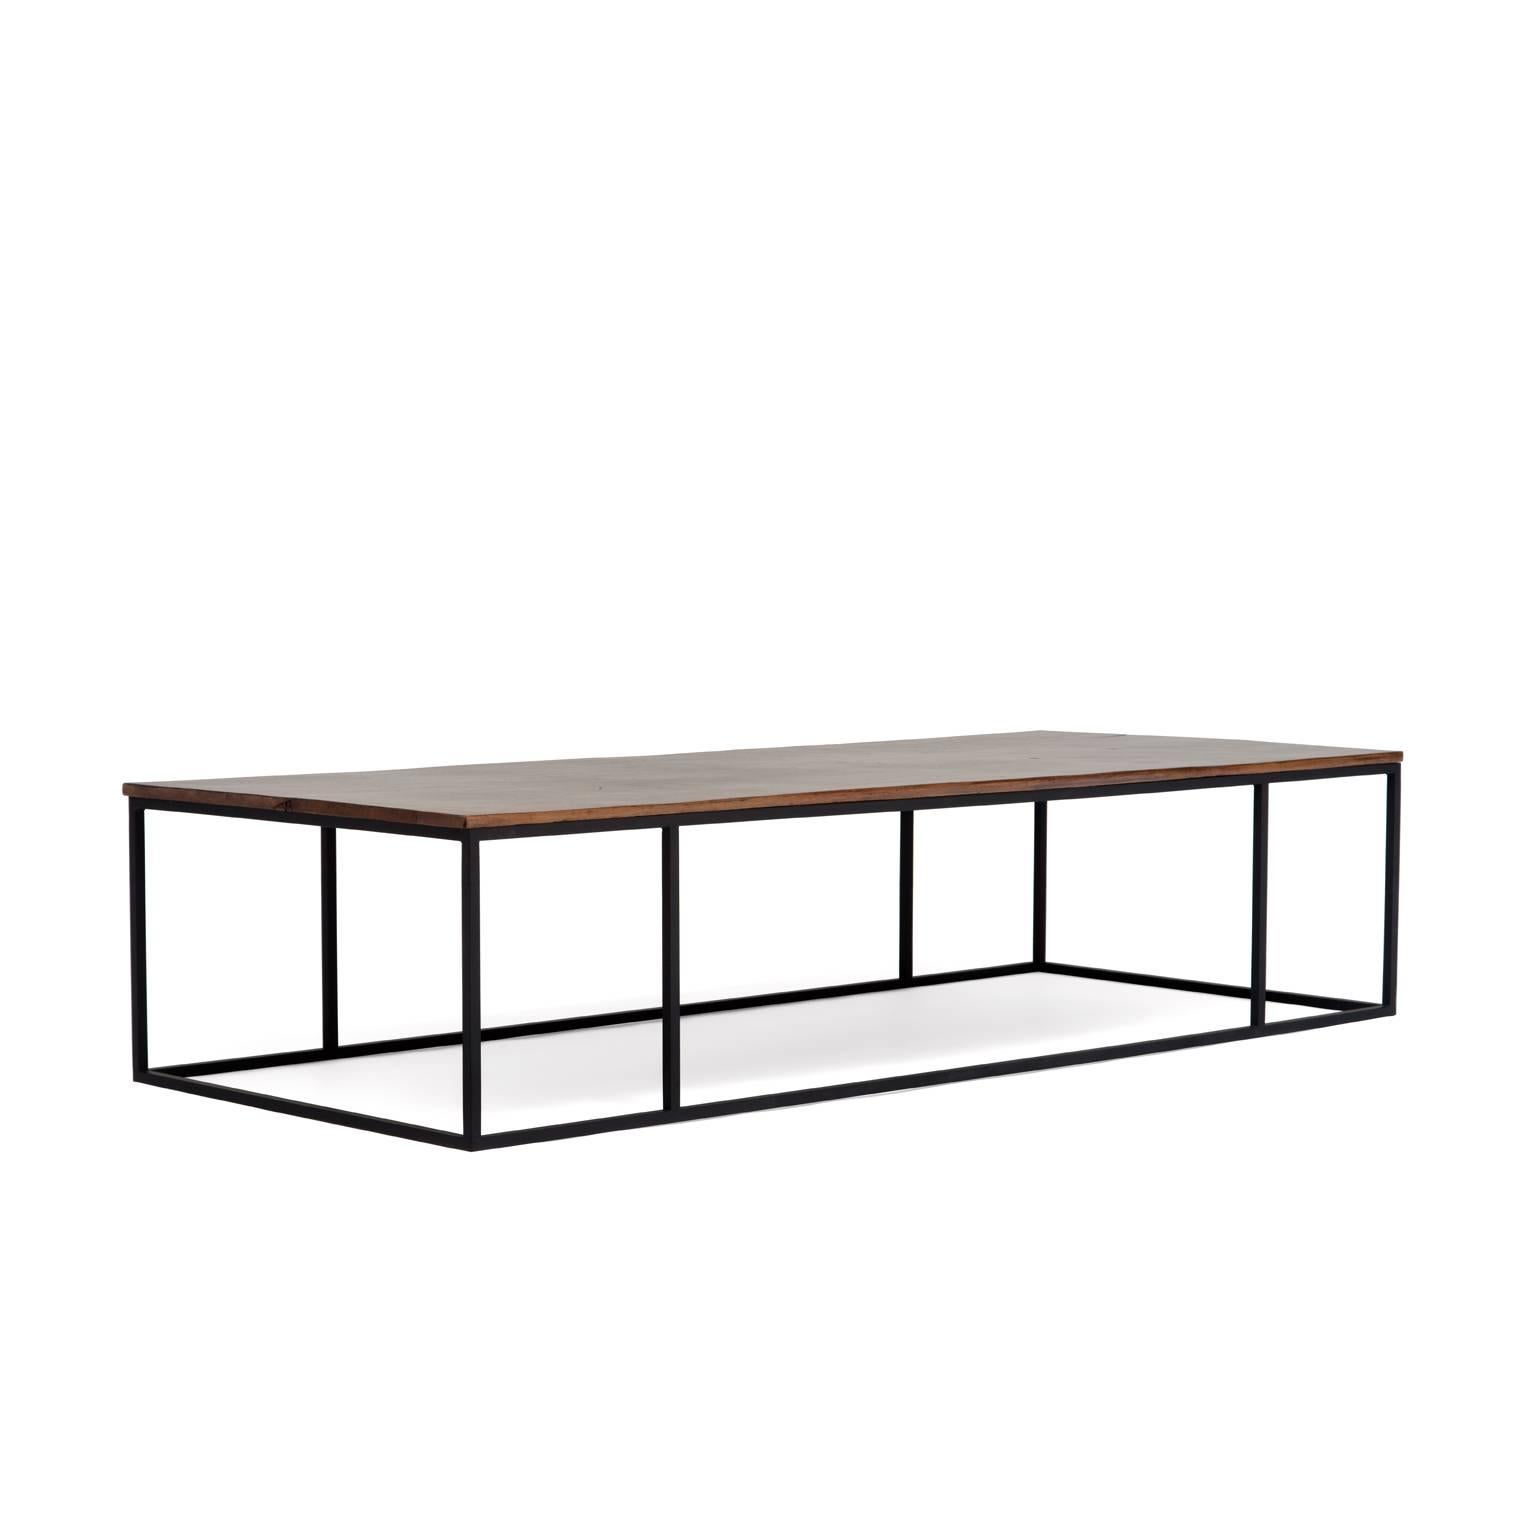 Atelier Demiurge Collection Netherlandish Coffee Table shown with a 19th c. walnut top on a blackened steel base in original patina. Inquire for finish and customization options.

Atelier Demiurge Collection pieces are made to order, and custom